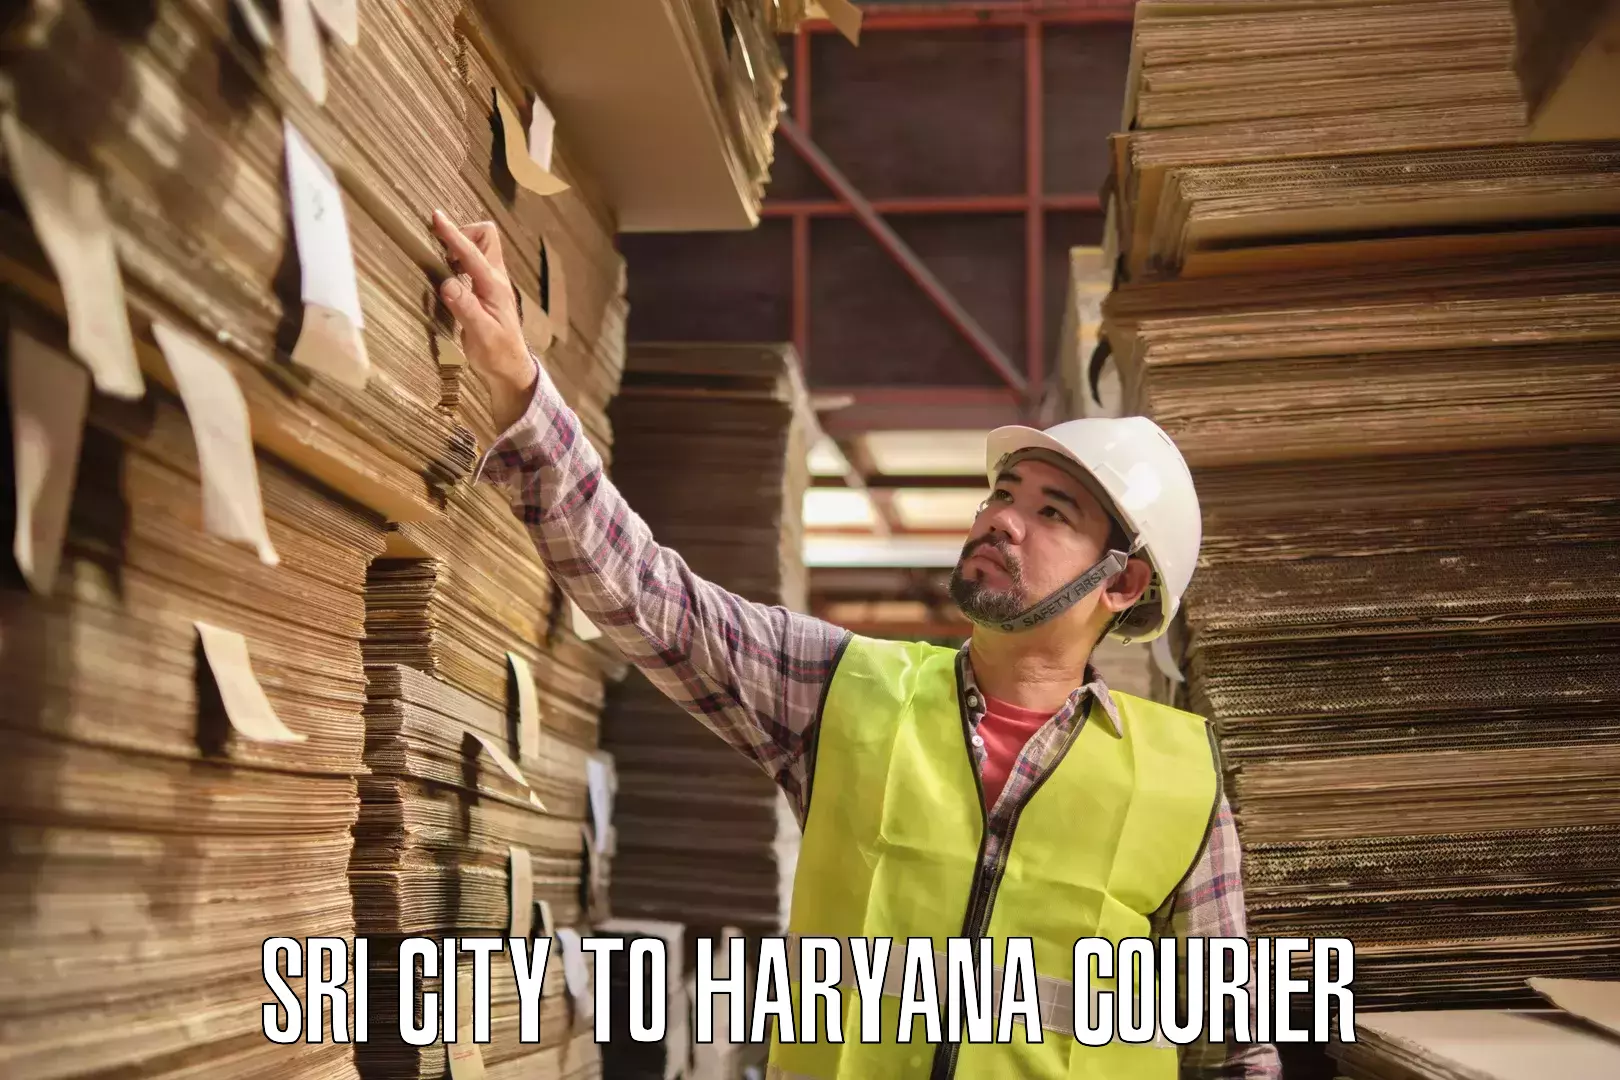 Courier dispatch services in Sri City to Haryana